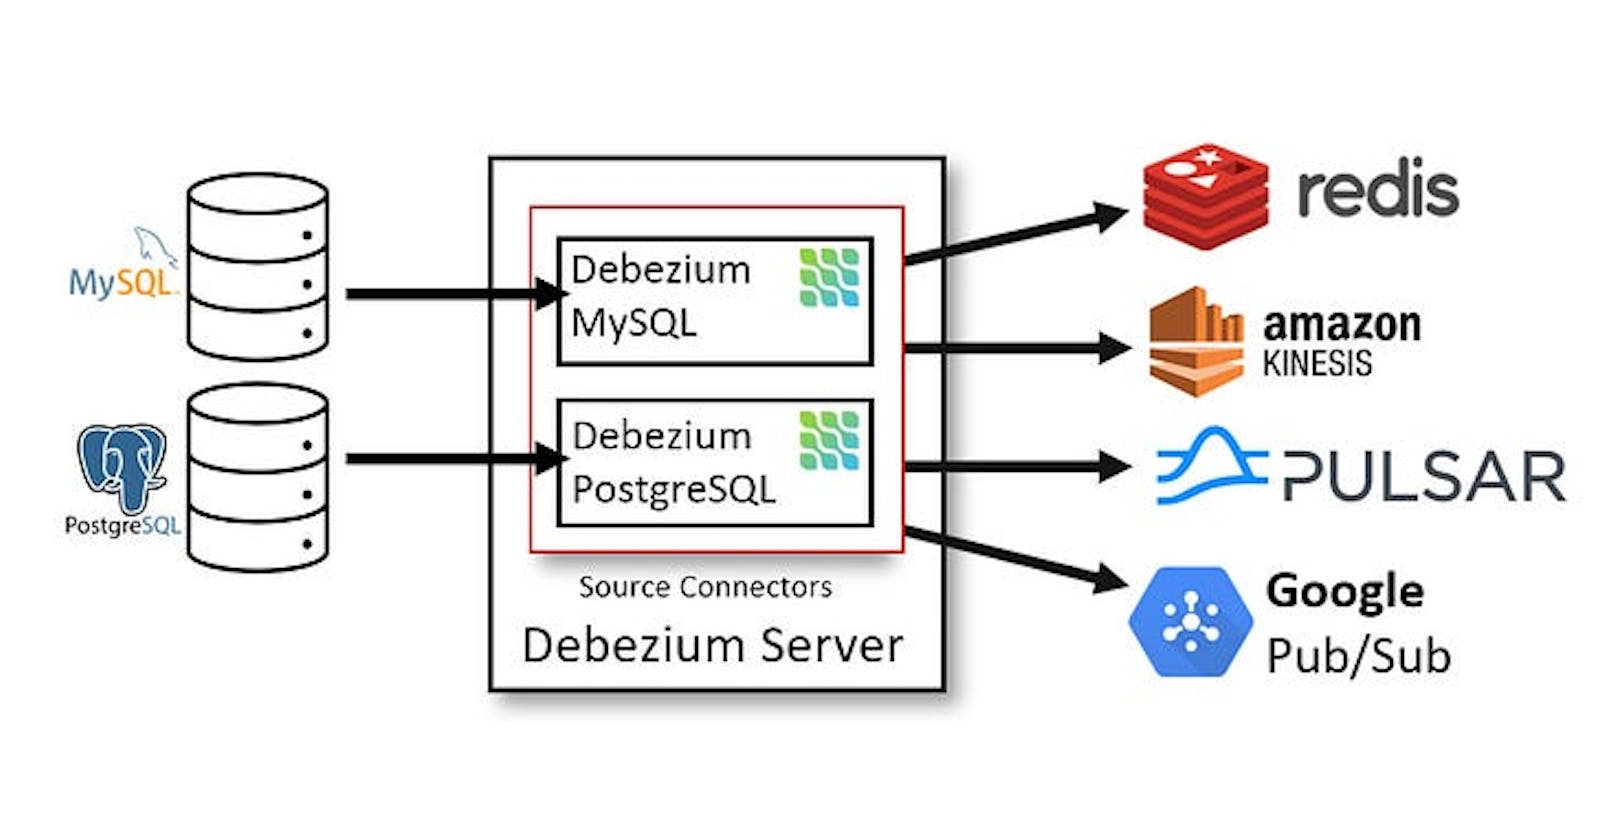 How to Set Up Debezium with MySQL for Real-Time Data Streaming and Change Data Capture